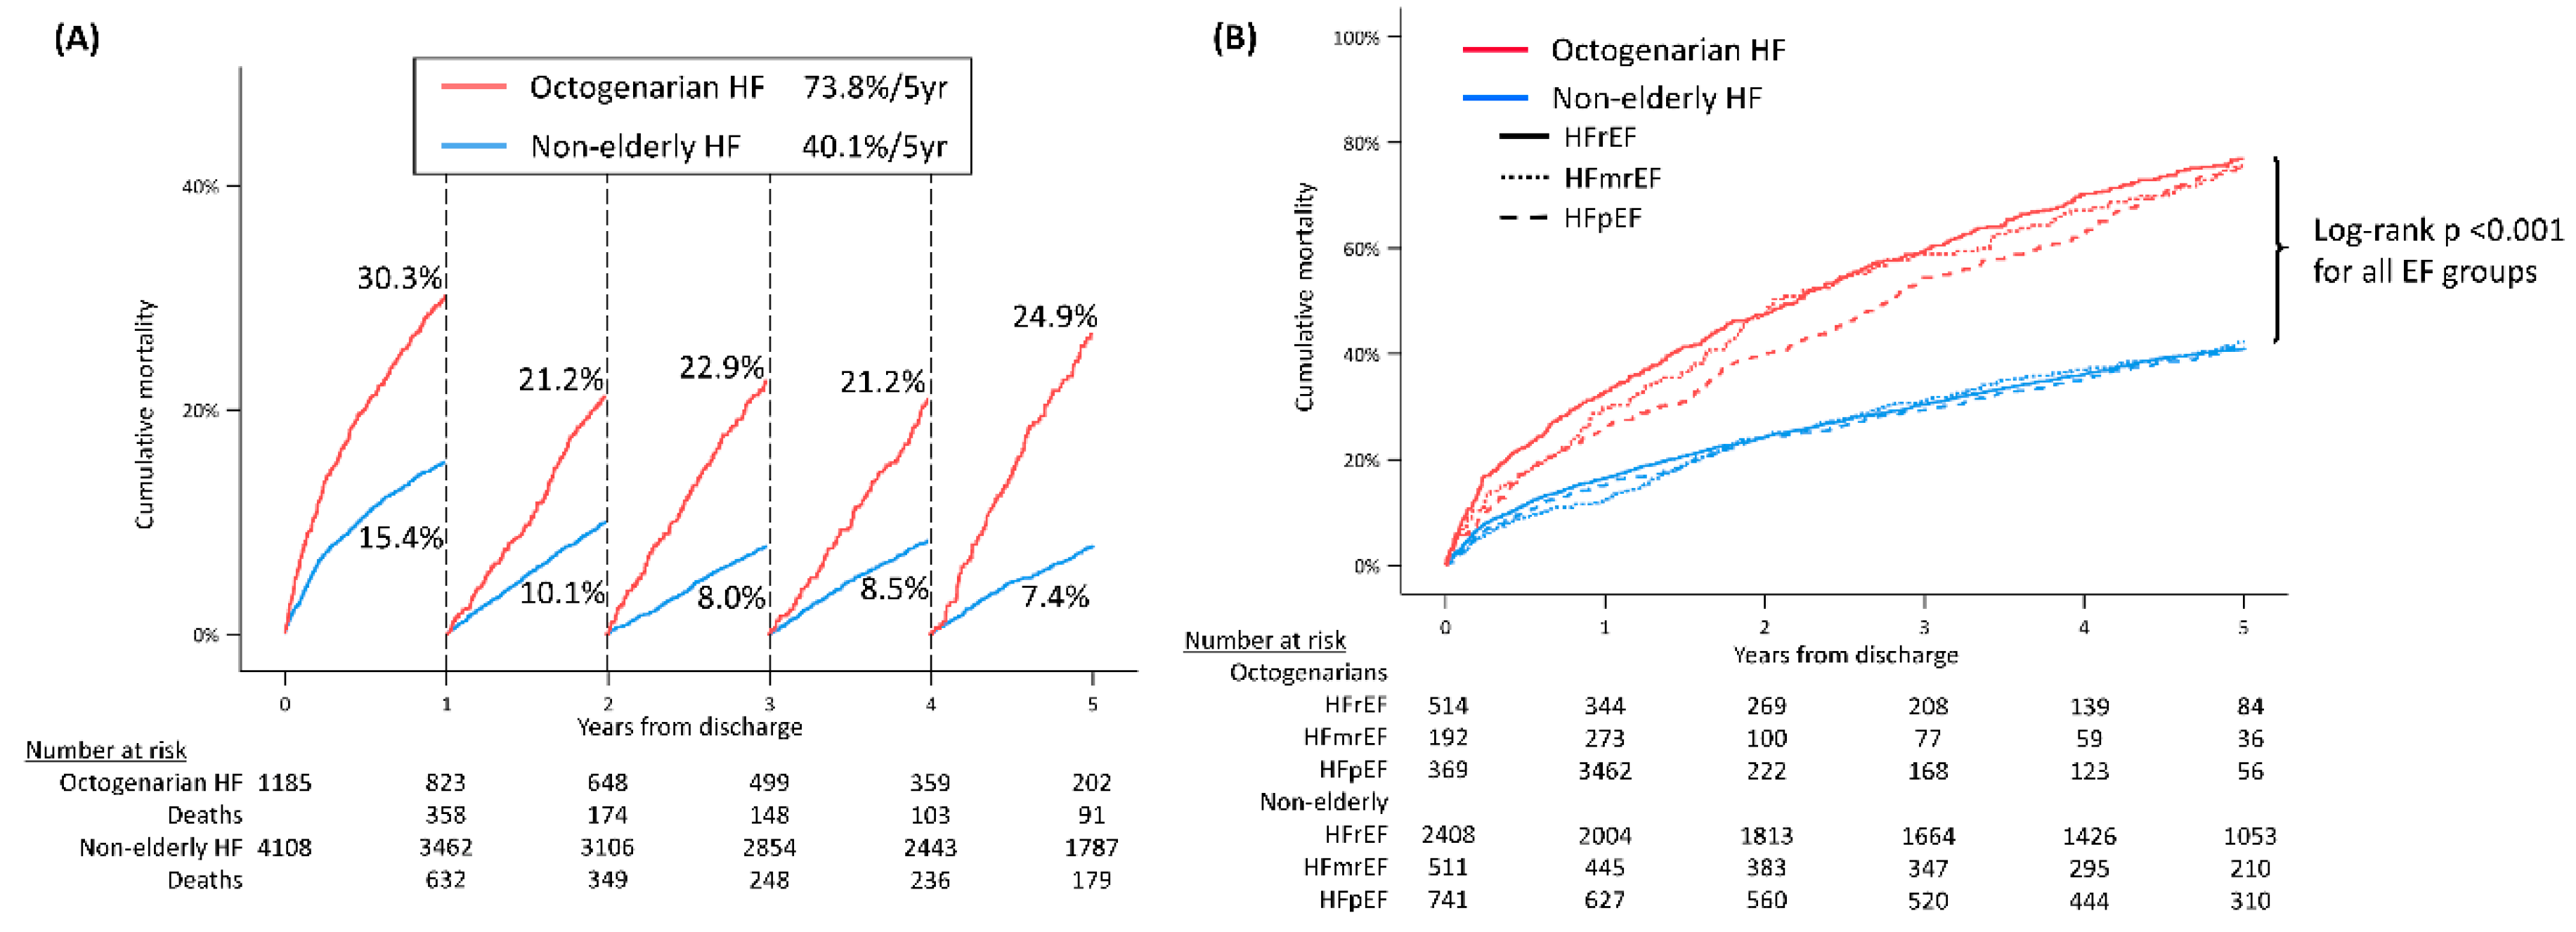 Jcm Free Full Text Management And Prognosis Of Heart Failure In Octogenarians Final Report From The Korahf Registry Html